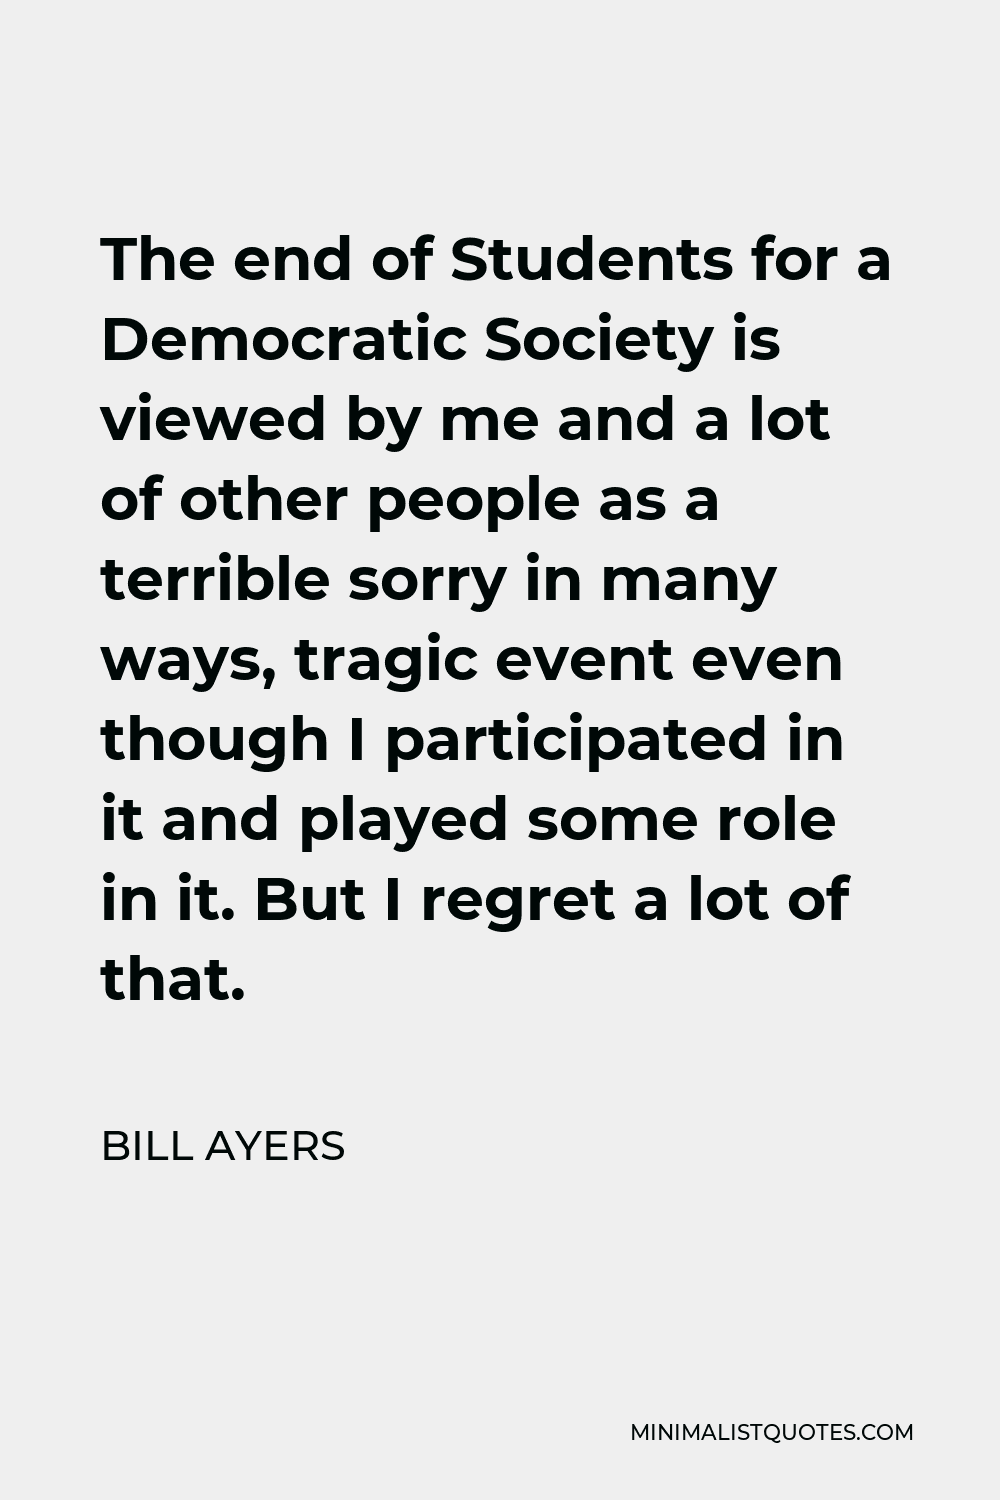 Bill Ayers Quote - The end of Students for a Democratic Society is viewed by me and a lot of other people as a terrible sorry in many ways, tragic event even though I participated in it and played some role in it. But I regret a lot of that.